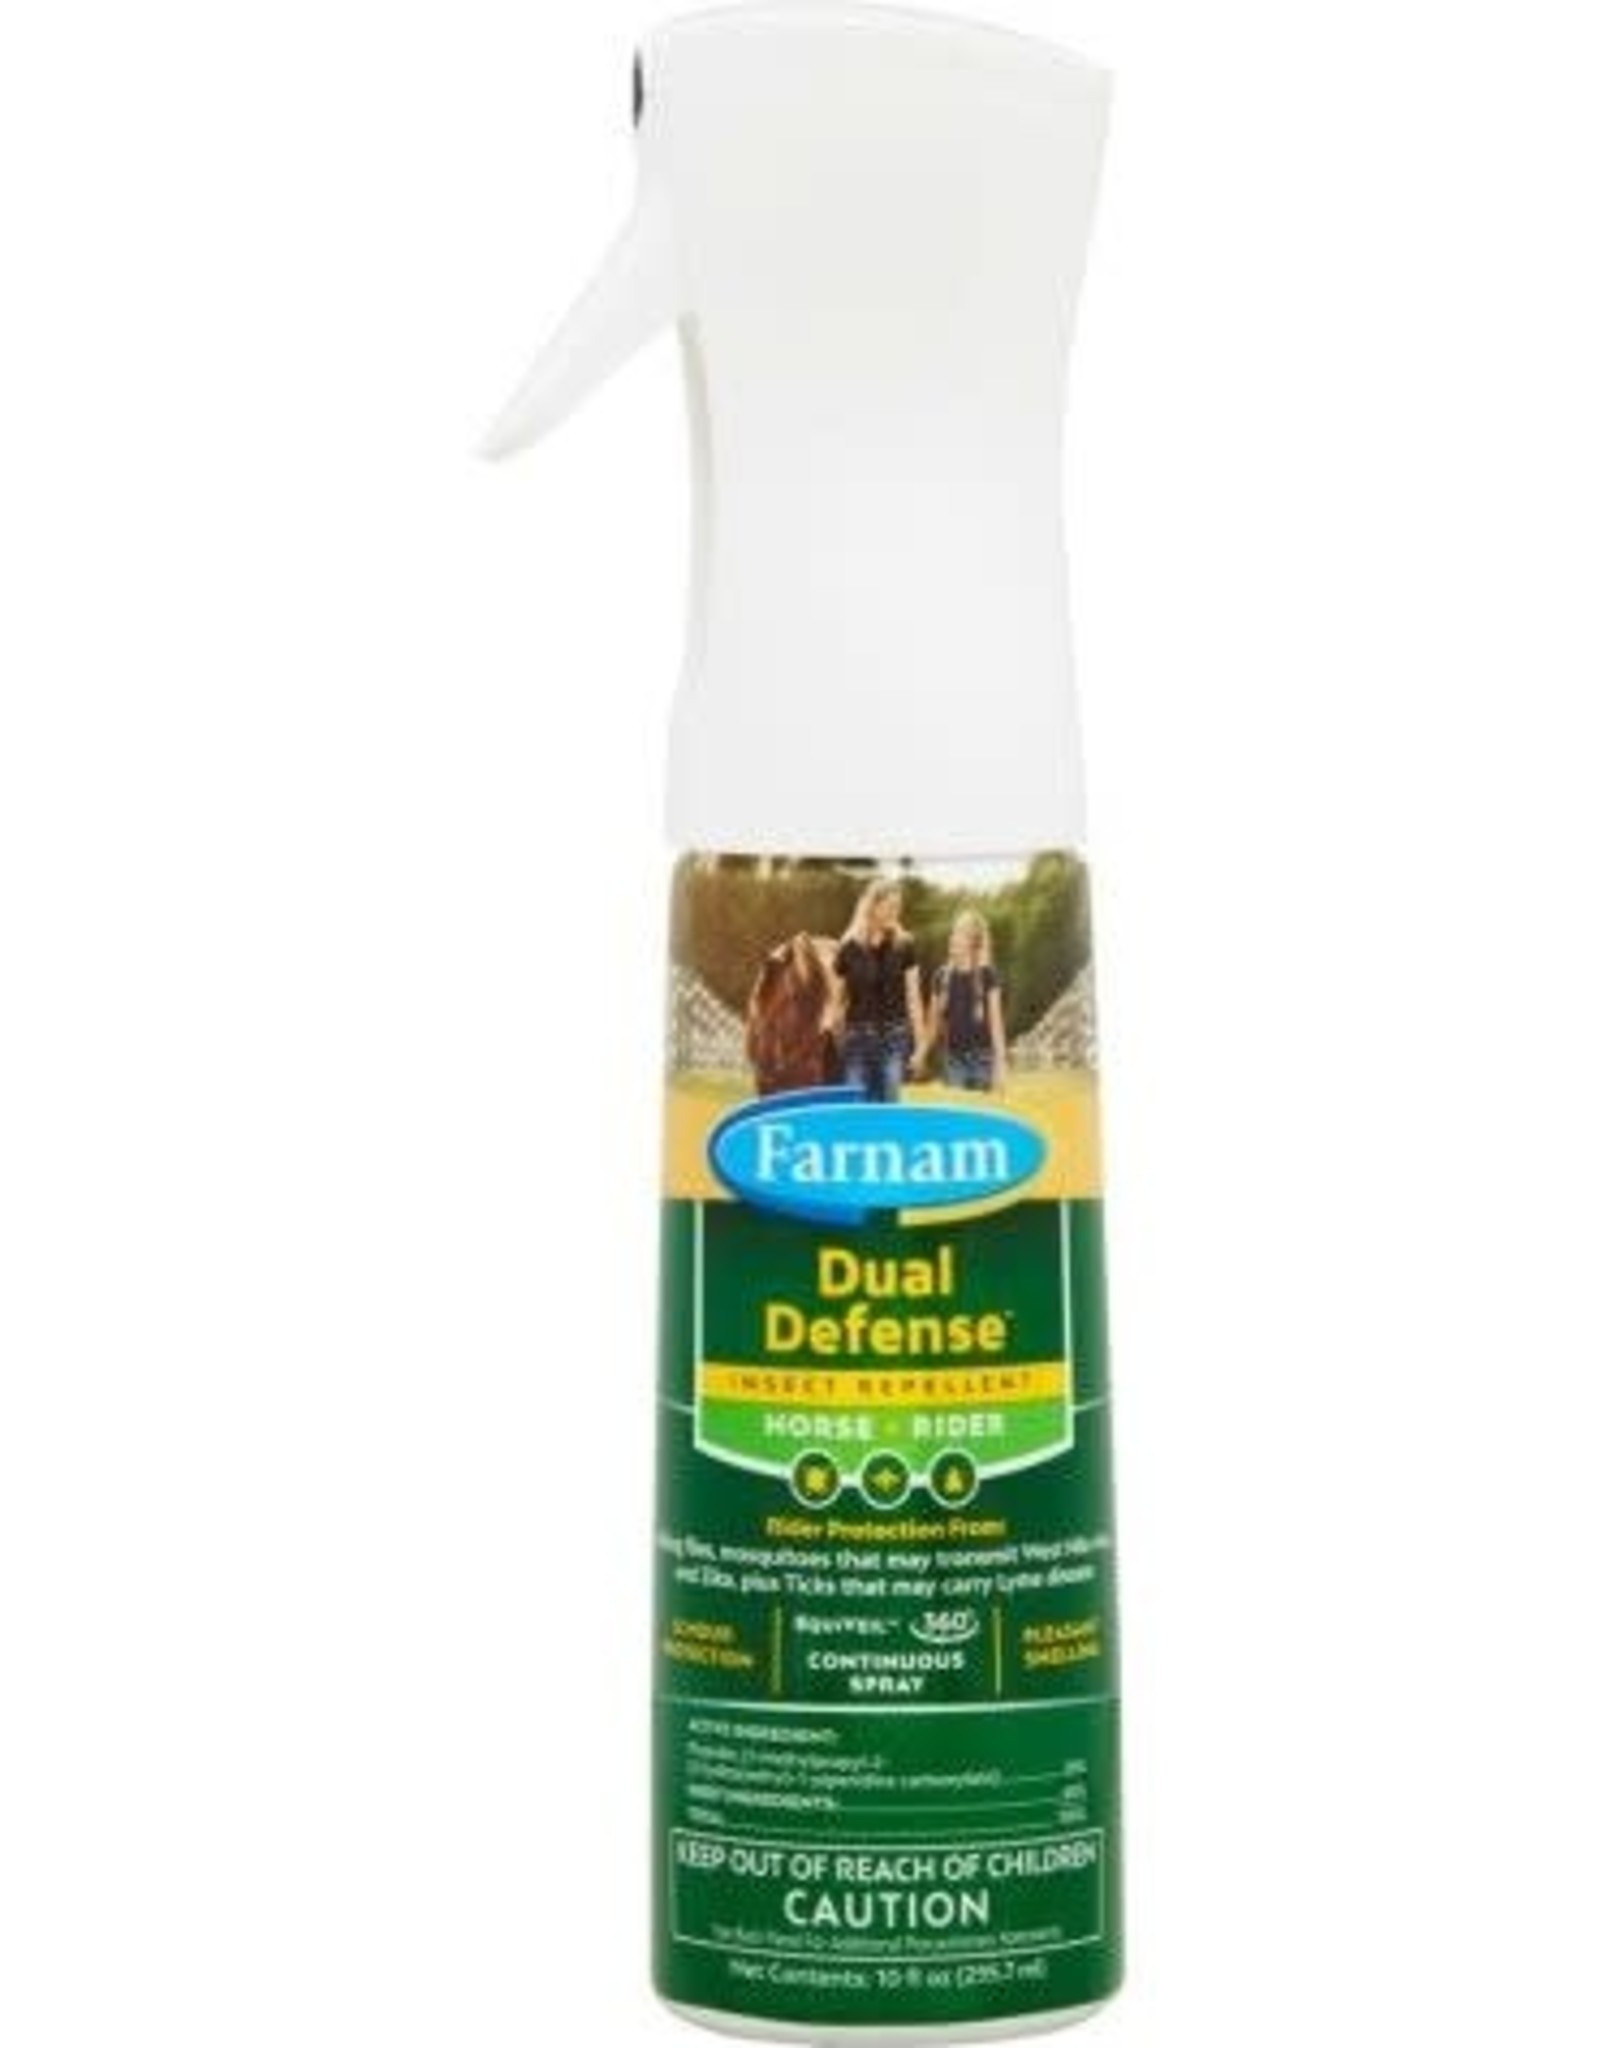 Farnam Dual Defense Insect Repellent for horse and rider